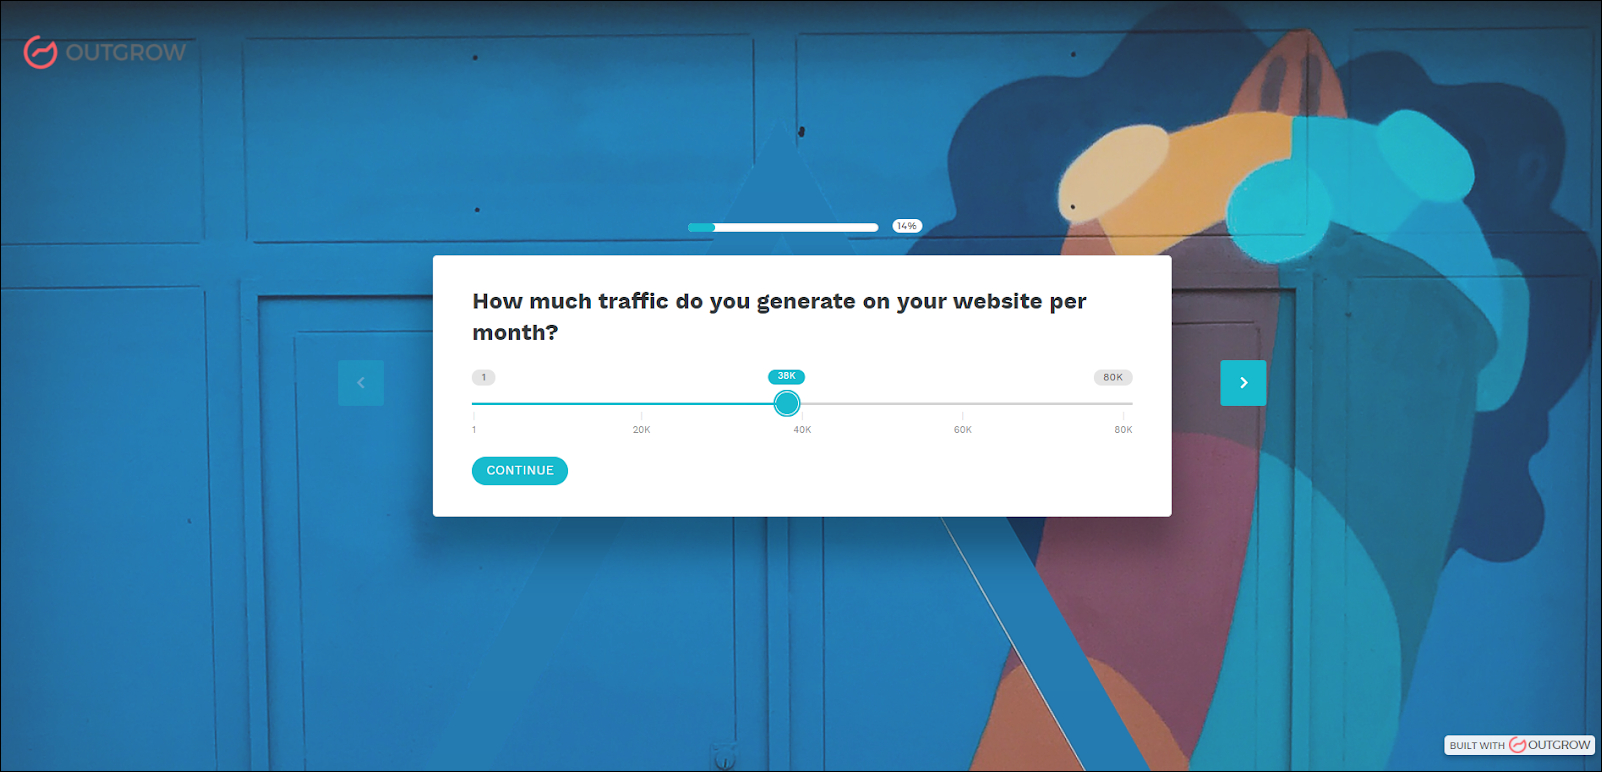 How to Create a Survey in 5 Minutes? - Outgrow